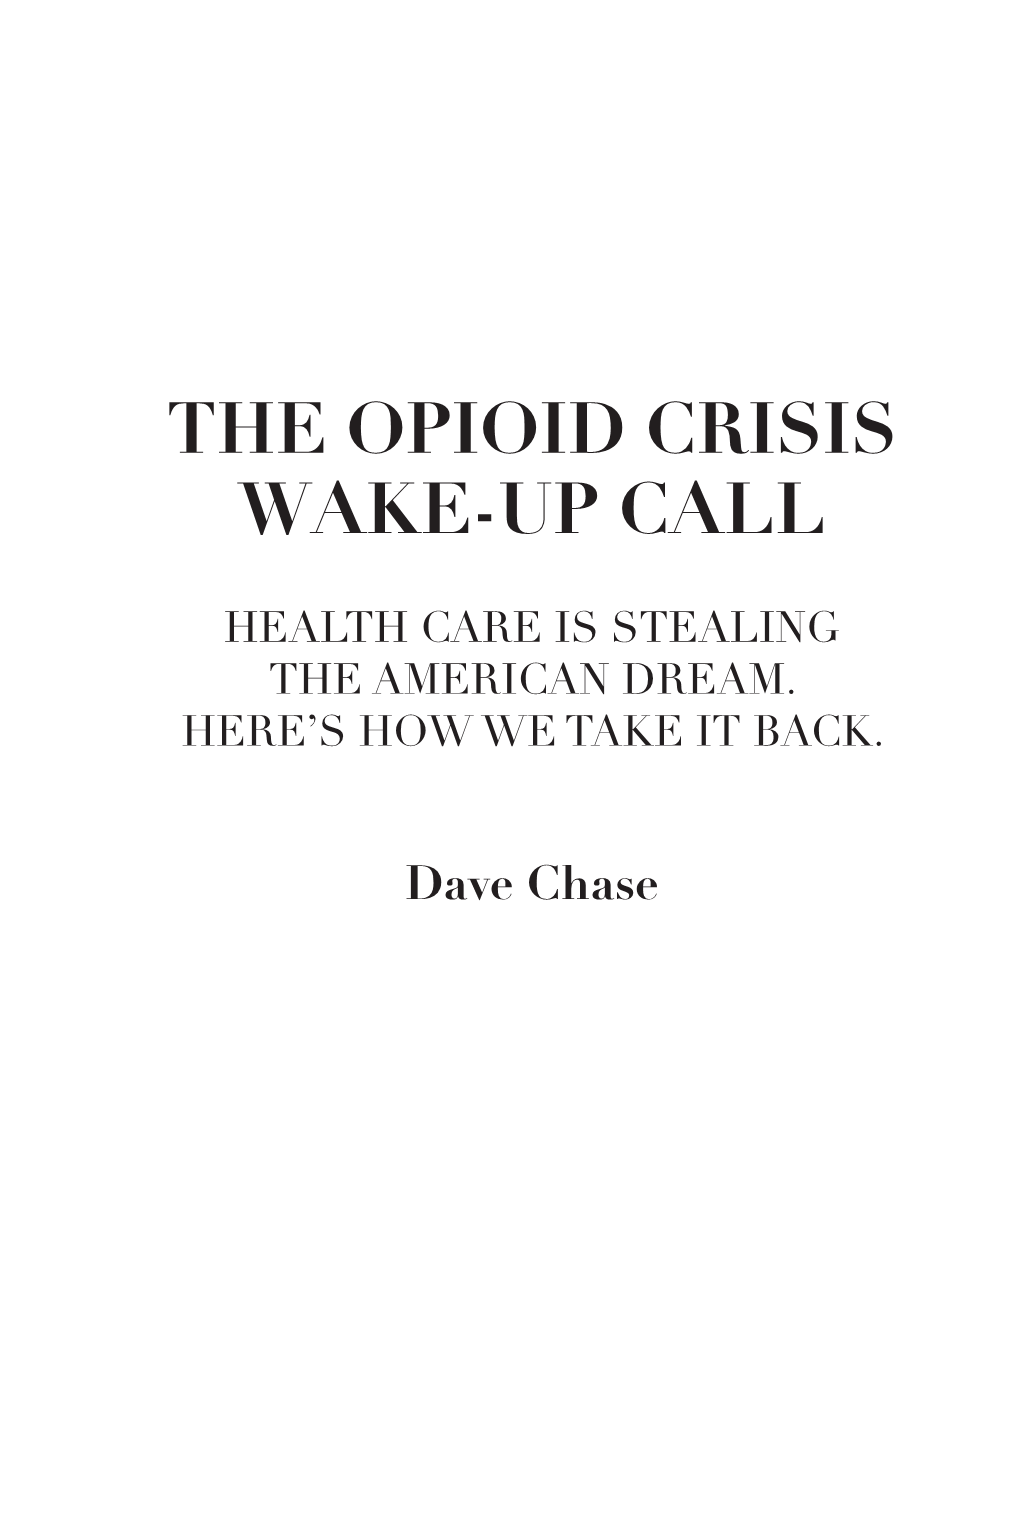 The Opioid Crisis Wake-Up Call-Book 3.Indd